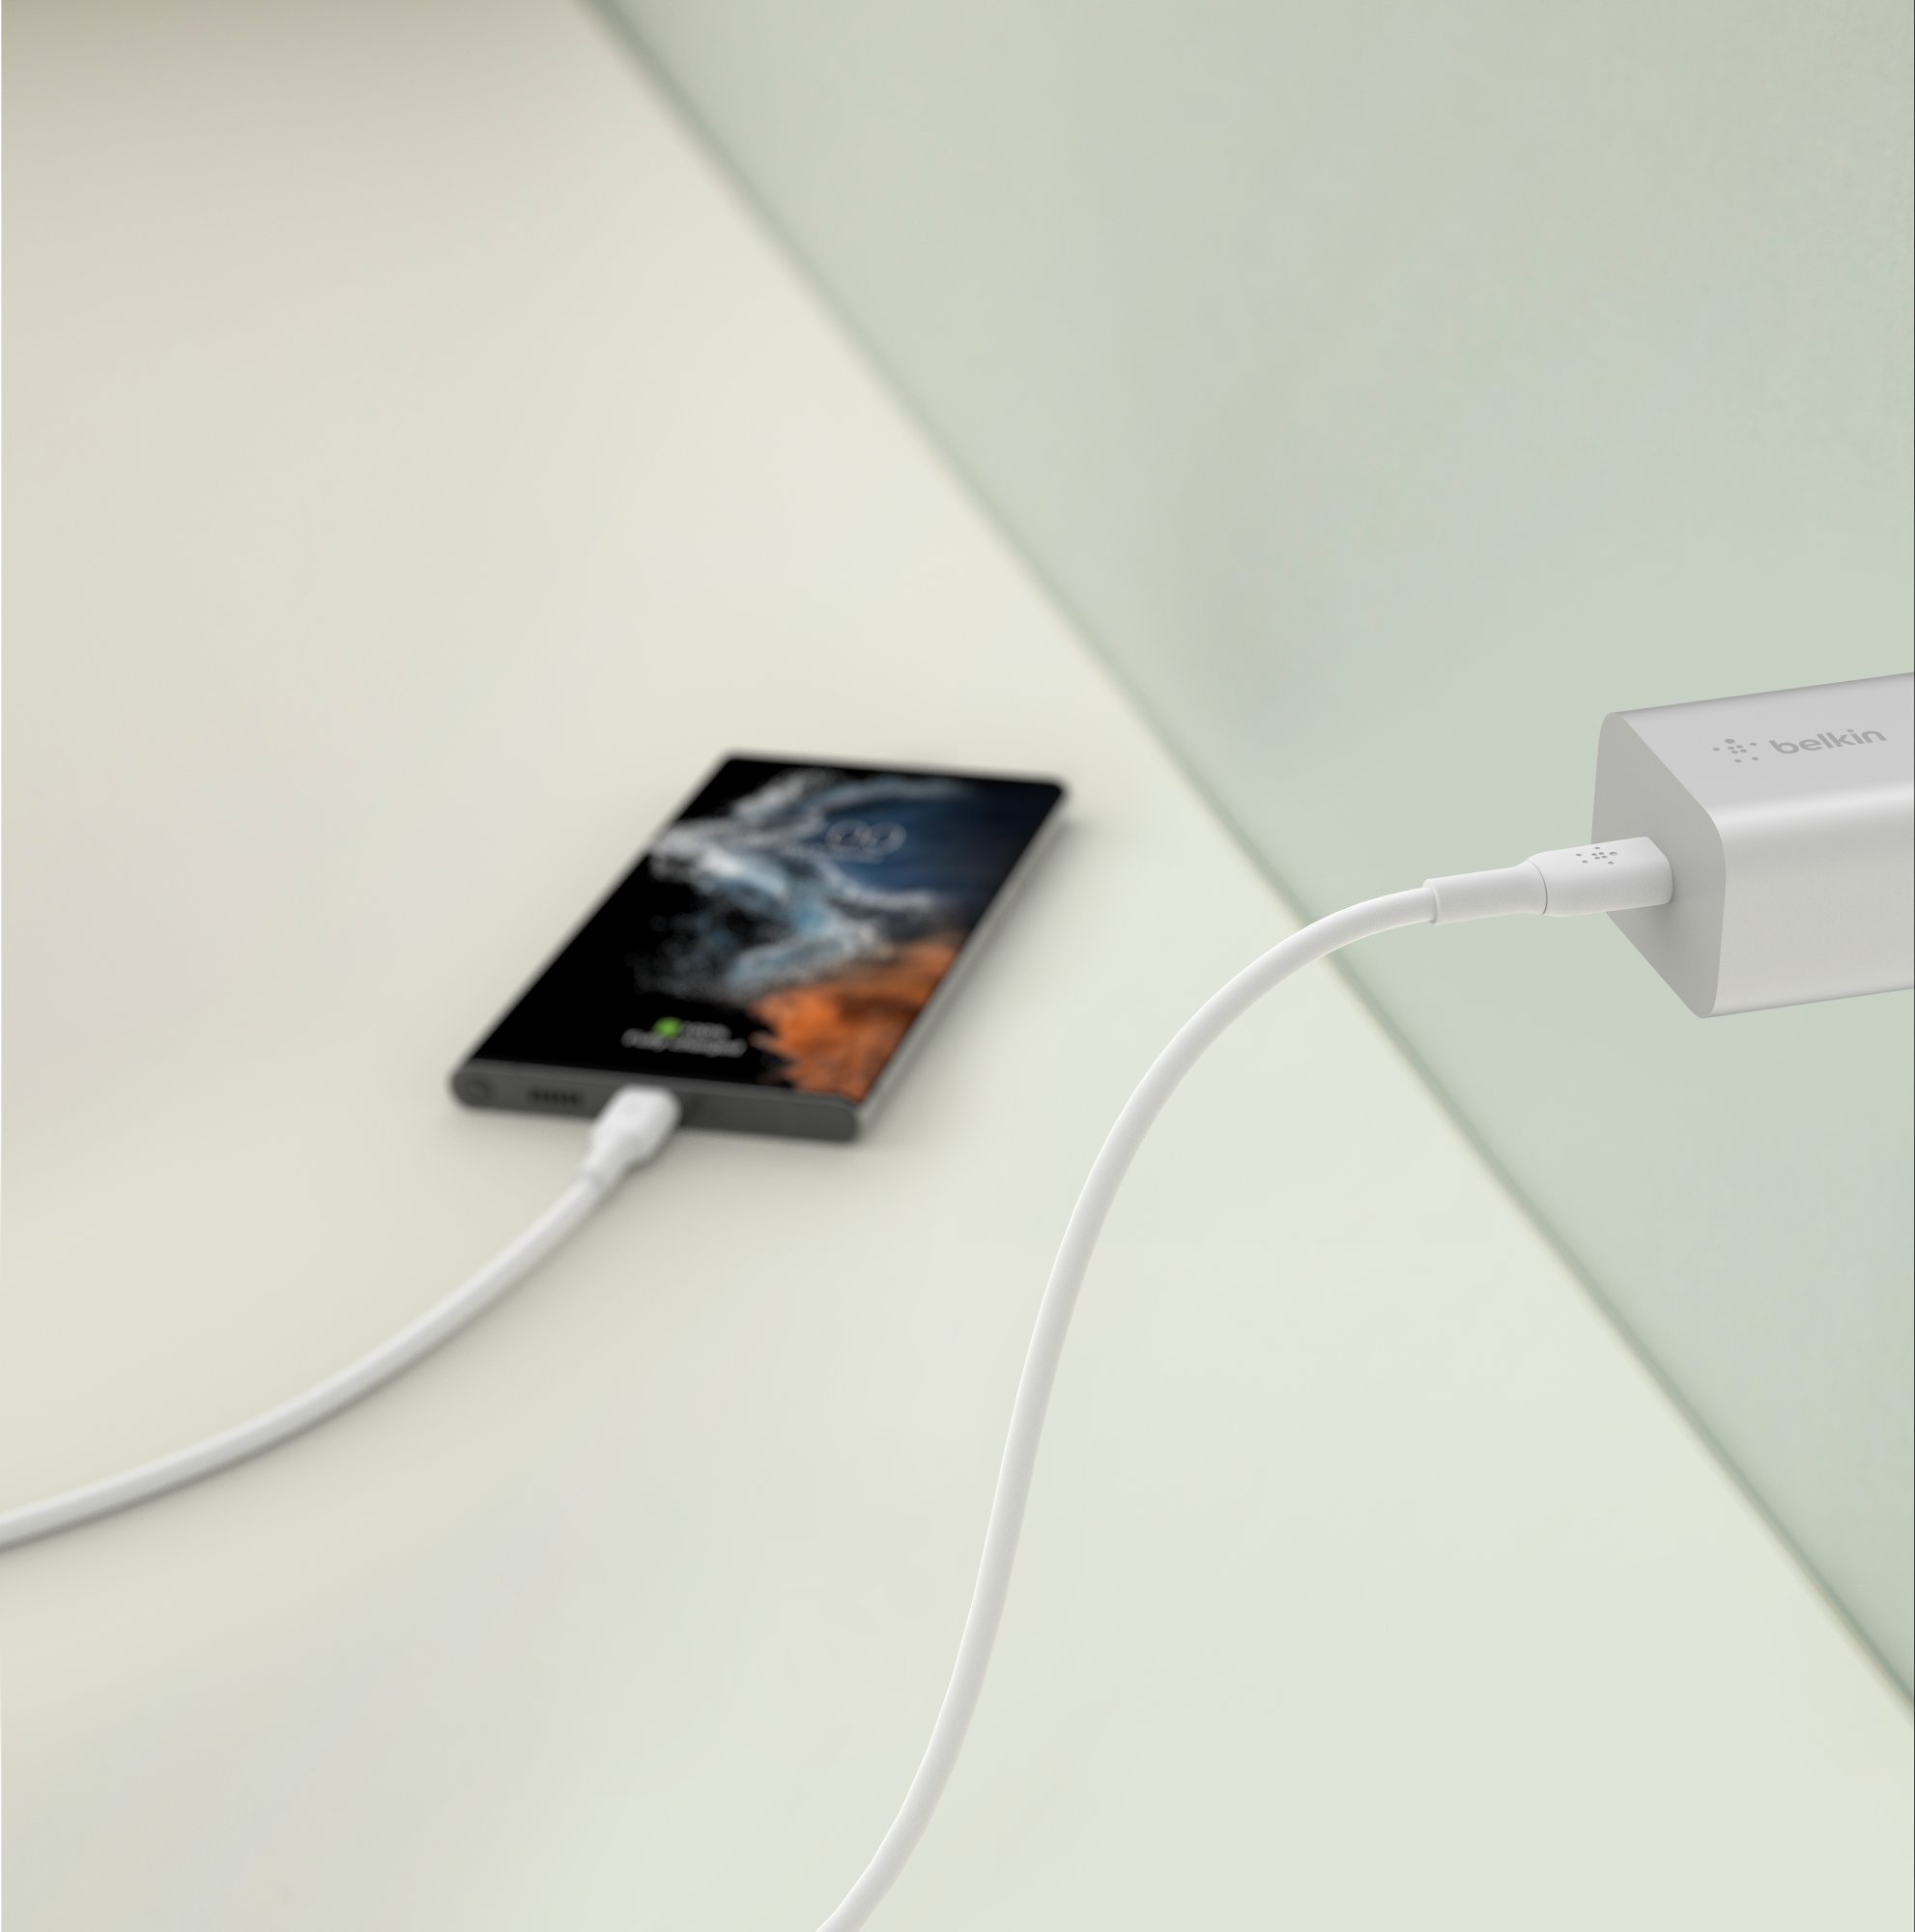 Belkin 20W USB C Wall Fast Charger - for iPhone , Samsung Galaxy, iPad, AirPods & More - Silver - image 4 of 9